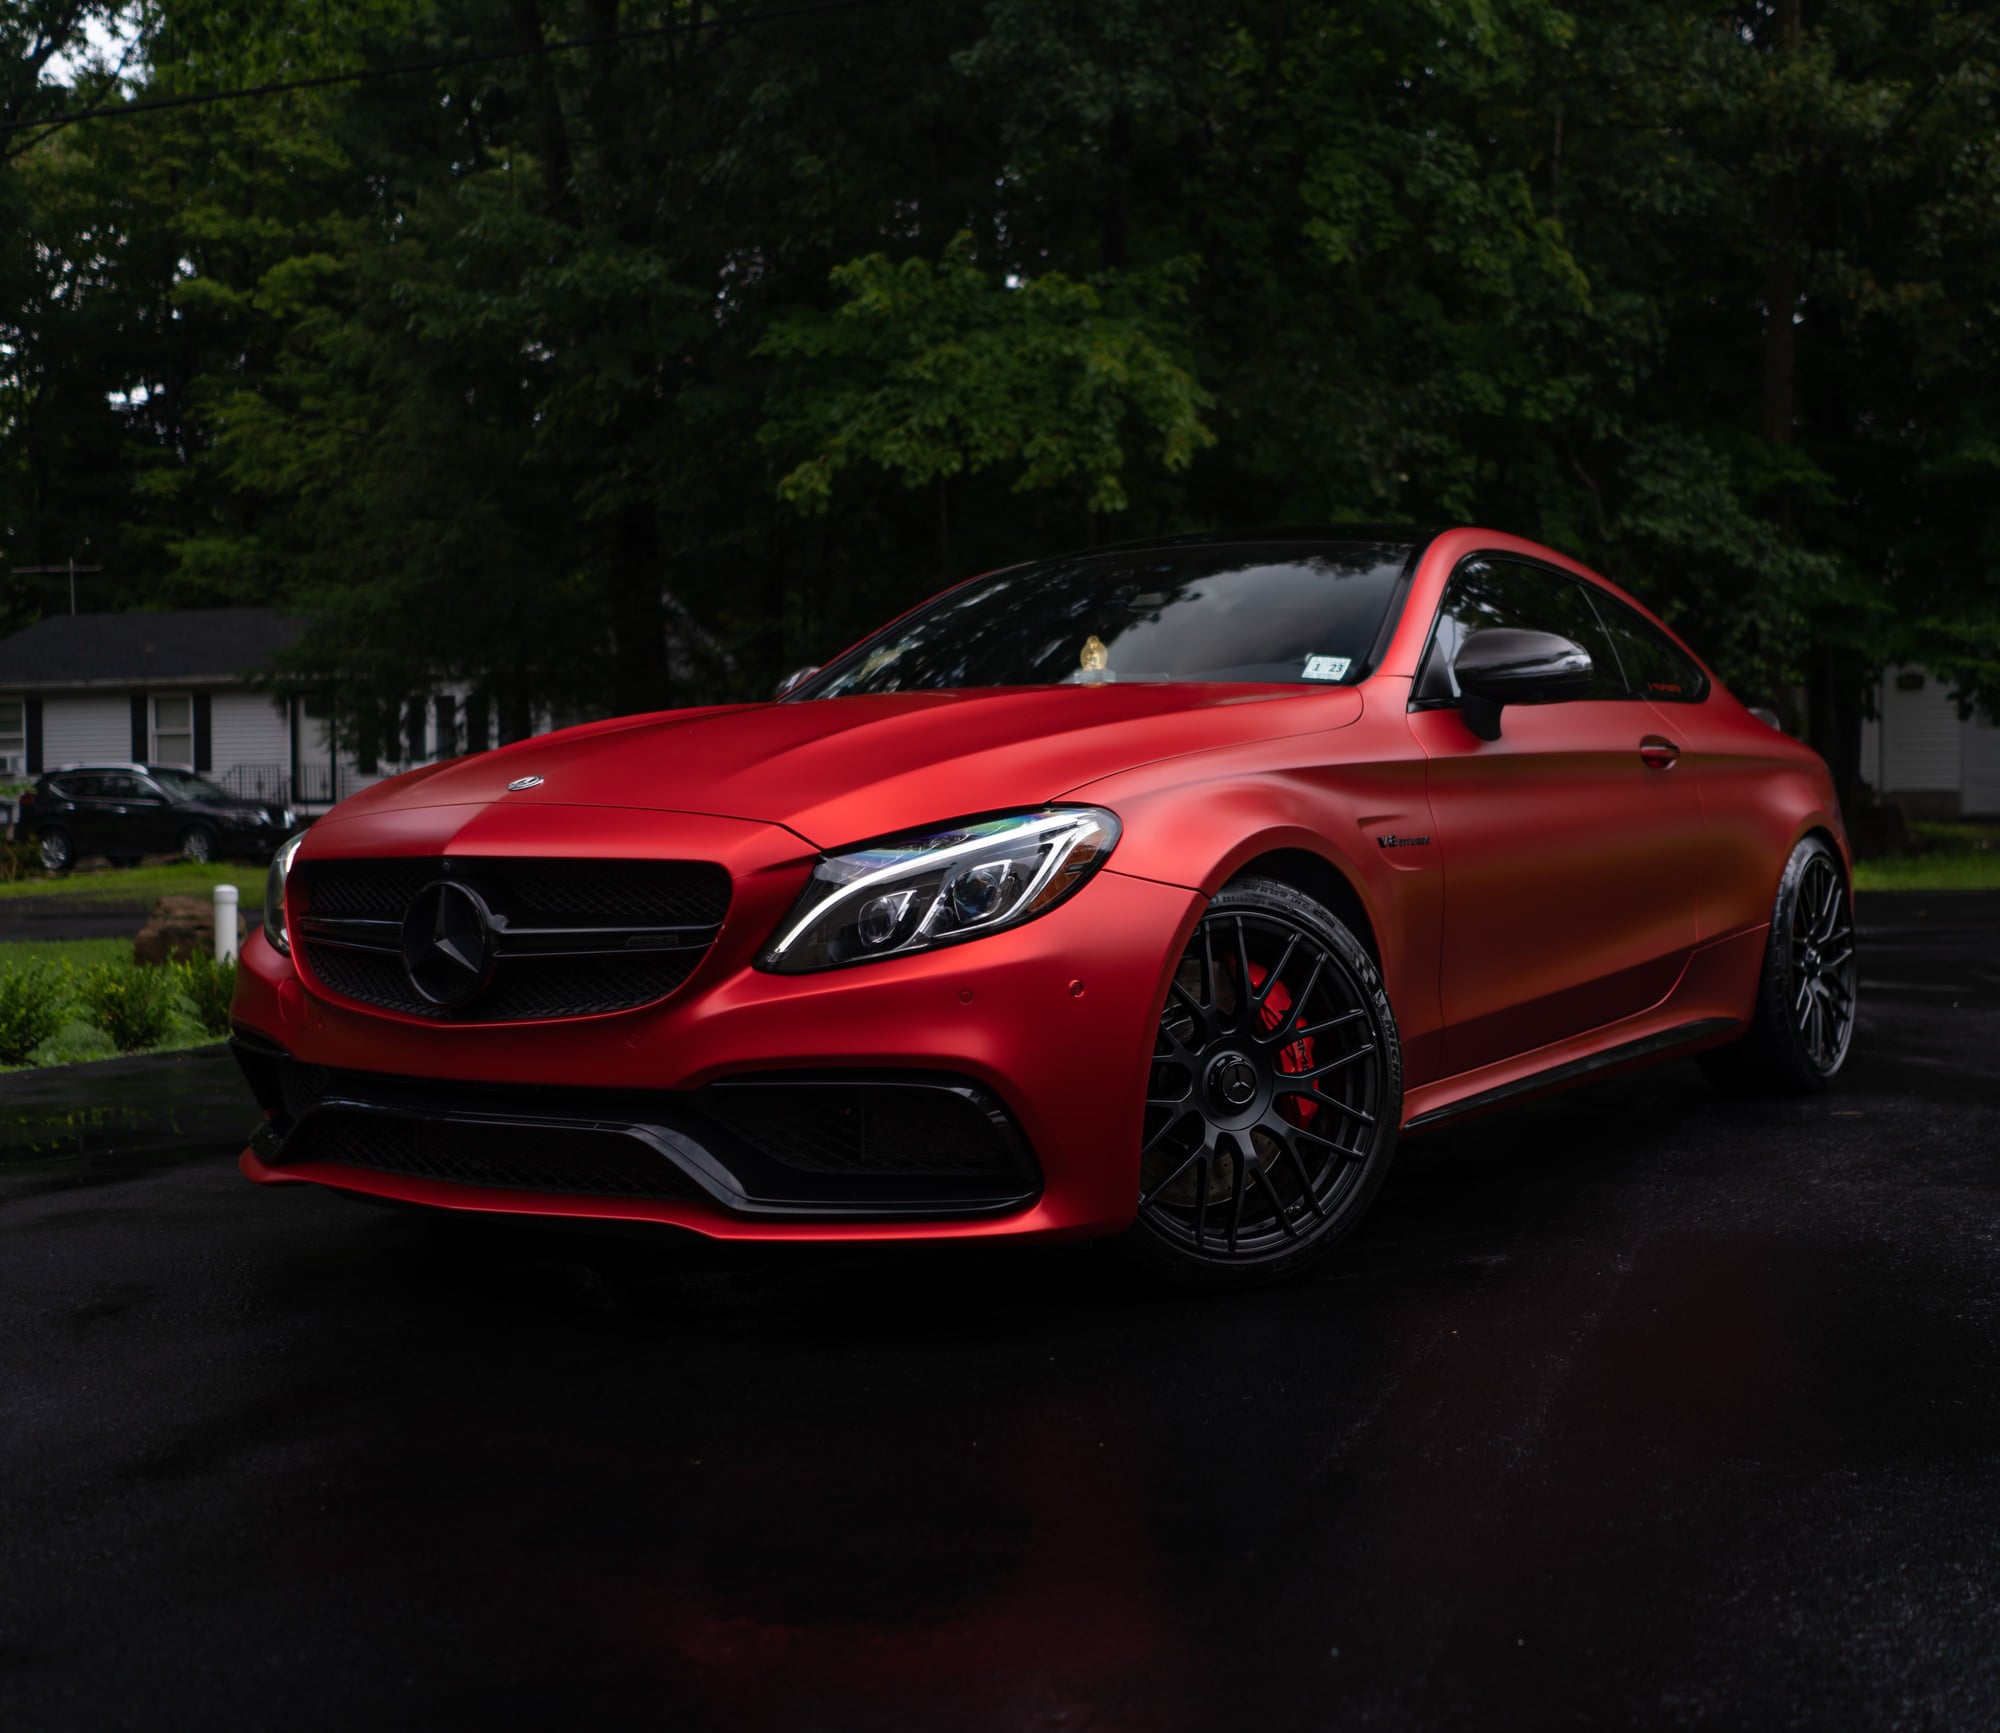 2018 Mercedes-Benz C63 AMG S - 2018 Mercedes C63S Coupe - Used - VIN wddwj8hb6jf681670 - 31,850 Miles - 8 cyl - 2WD - Automatic - Coupe - Red - Hackettstown, NJ 07840, United States